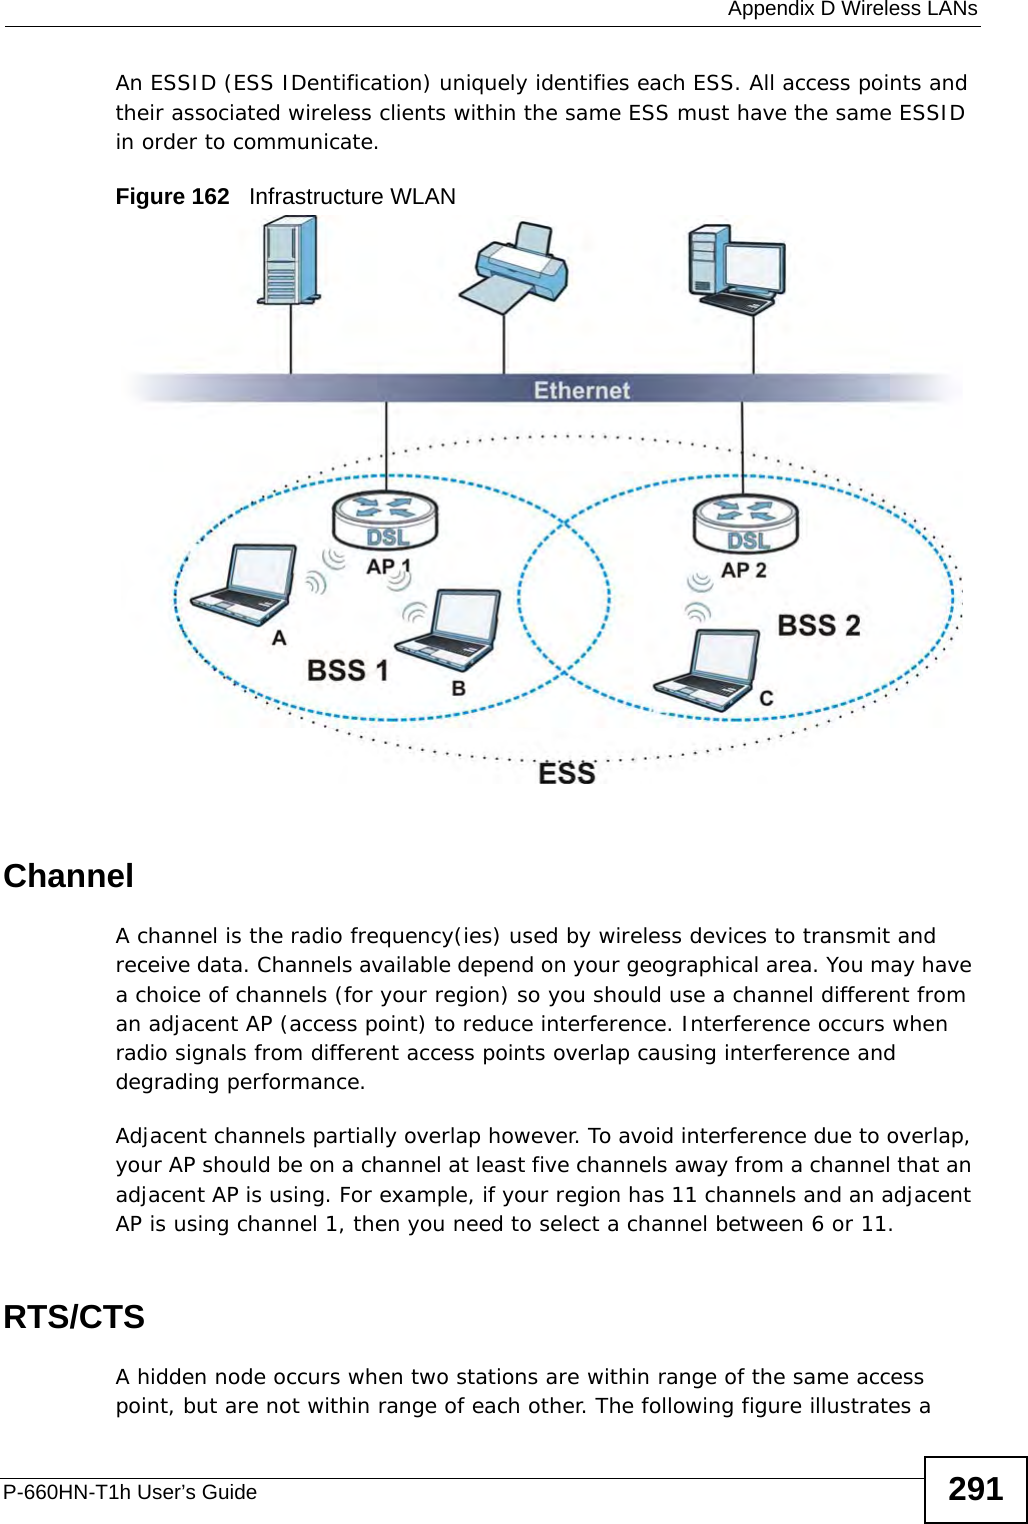  Appendix D Wireless LANsP-660HN-T1h User’s Guide 291An ESSID (ESS IDentification) uniquely identifies each ESS. All access points and their associated wireless clients within the same ESS must have the same ESSID in order to communicate.Figure 162   Infrastructure WLANChannelA channel is the radio frequency(ies) used by wireless devices to transmit and receive data. Channels available depend on your geographical area. You may have a choice of channels (for your region) so you should use a channel different from an adjacent AP (access point) to reduce interference. Interference occurs when radio signals from different access points overlap causing interference and degrading performance.Adjacent channels partially overlap however. To avoid interference due to overlap, your AP should be on a channel at least five channels away from a channel that an adjacent AP is using. For example, if your region has 11 channels and an adjacent AP is using channel 1, then you need to select a channel between 6 or 11.RTS/CTSA hidden node occurs when two stations are within range of the same access point, but are not within range of each other. The following figure illustrates a 